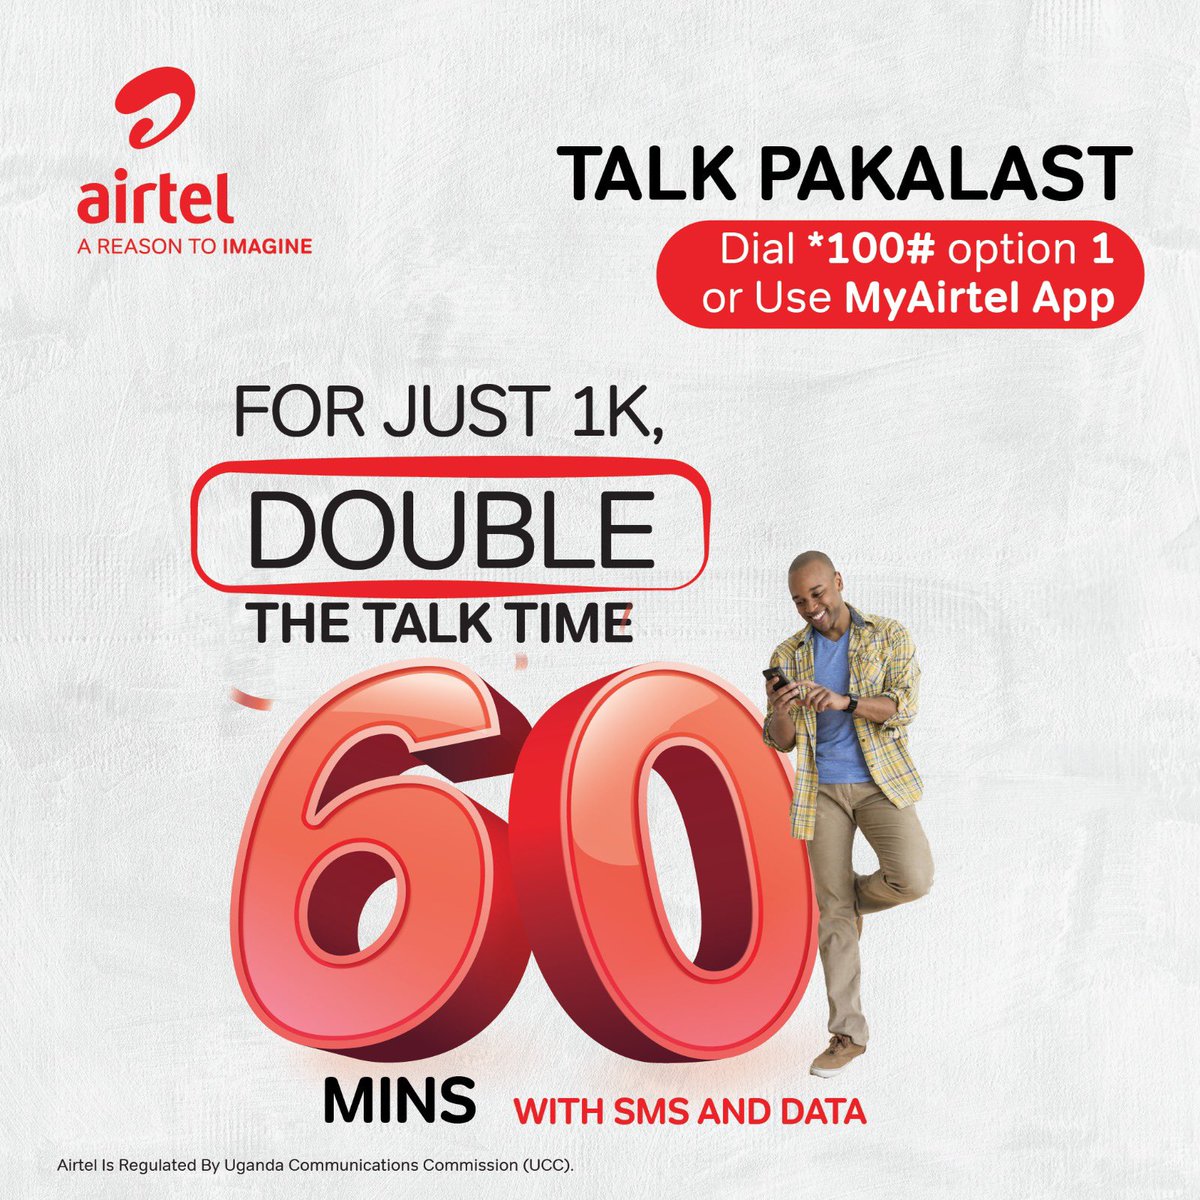 Double the talk time for only shs.1,000 and get 60 minutes with free 5MBs and 5SMS

Simply dial *100# option 1 or use the #MyAirtelApp to subscribe for this offer😊
#TalkPAKALAST